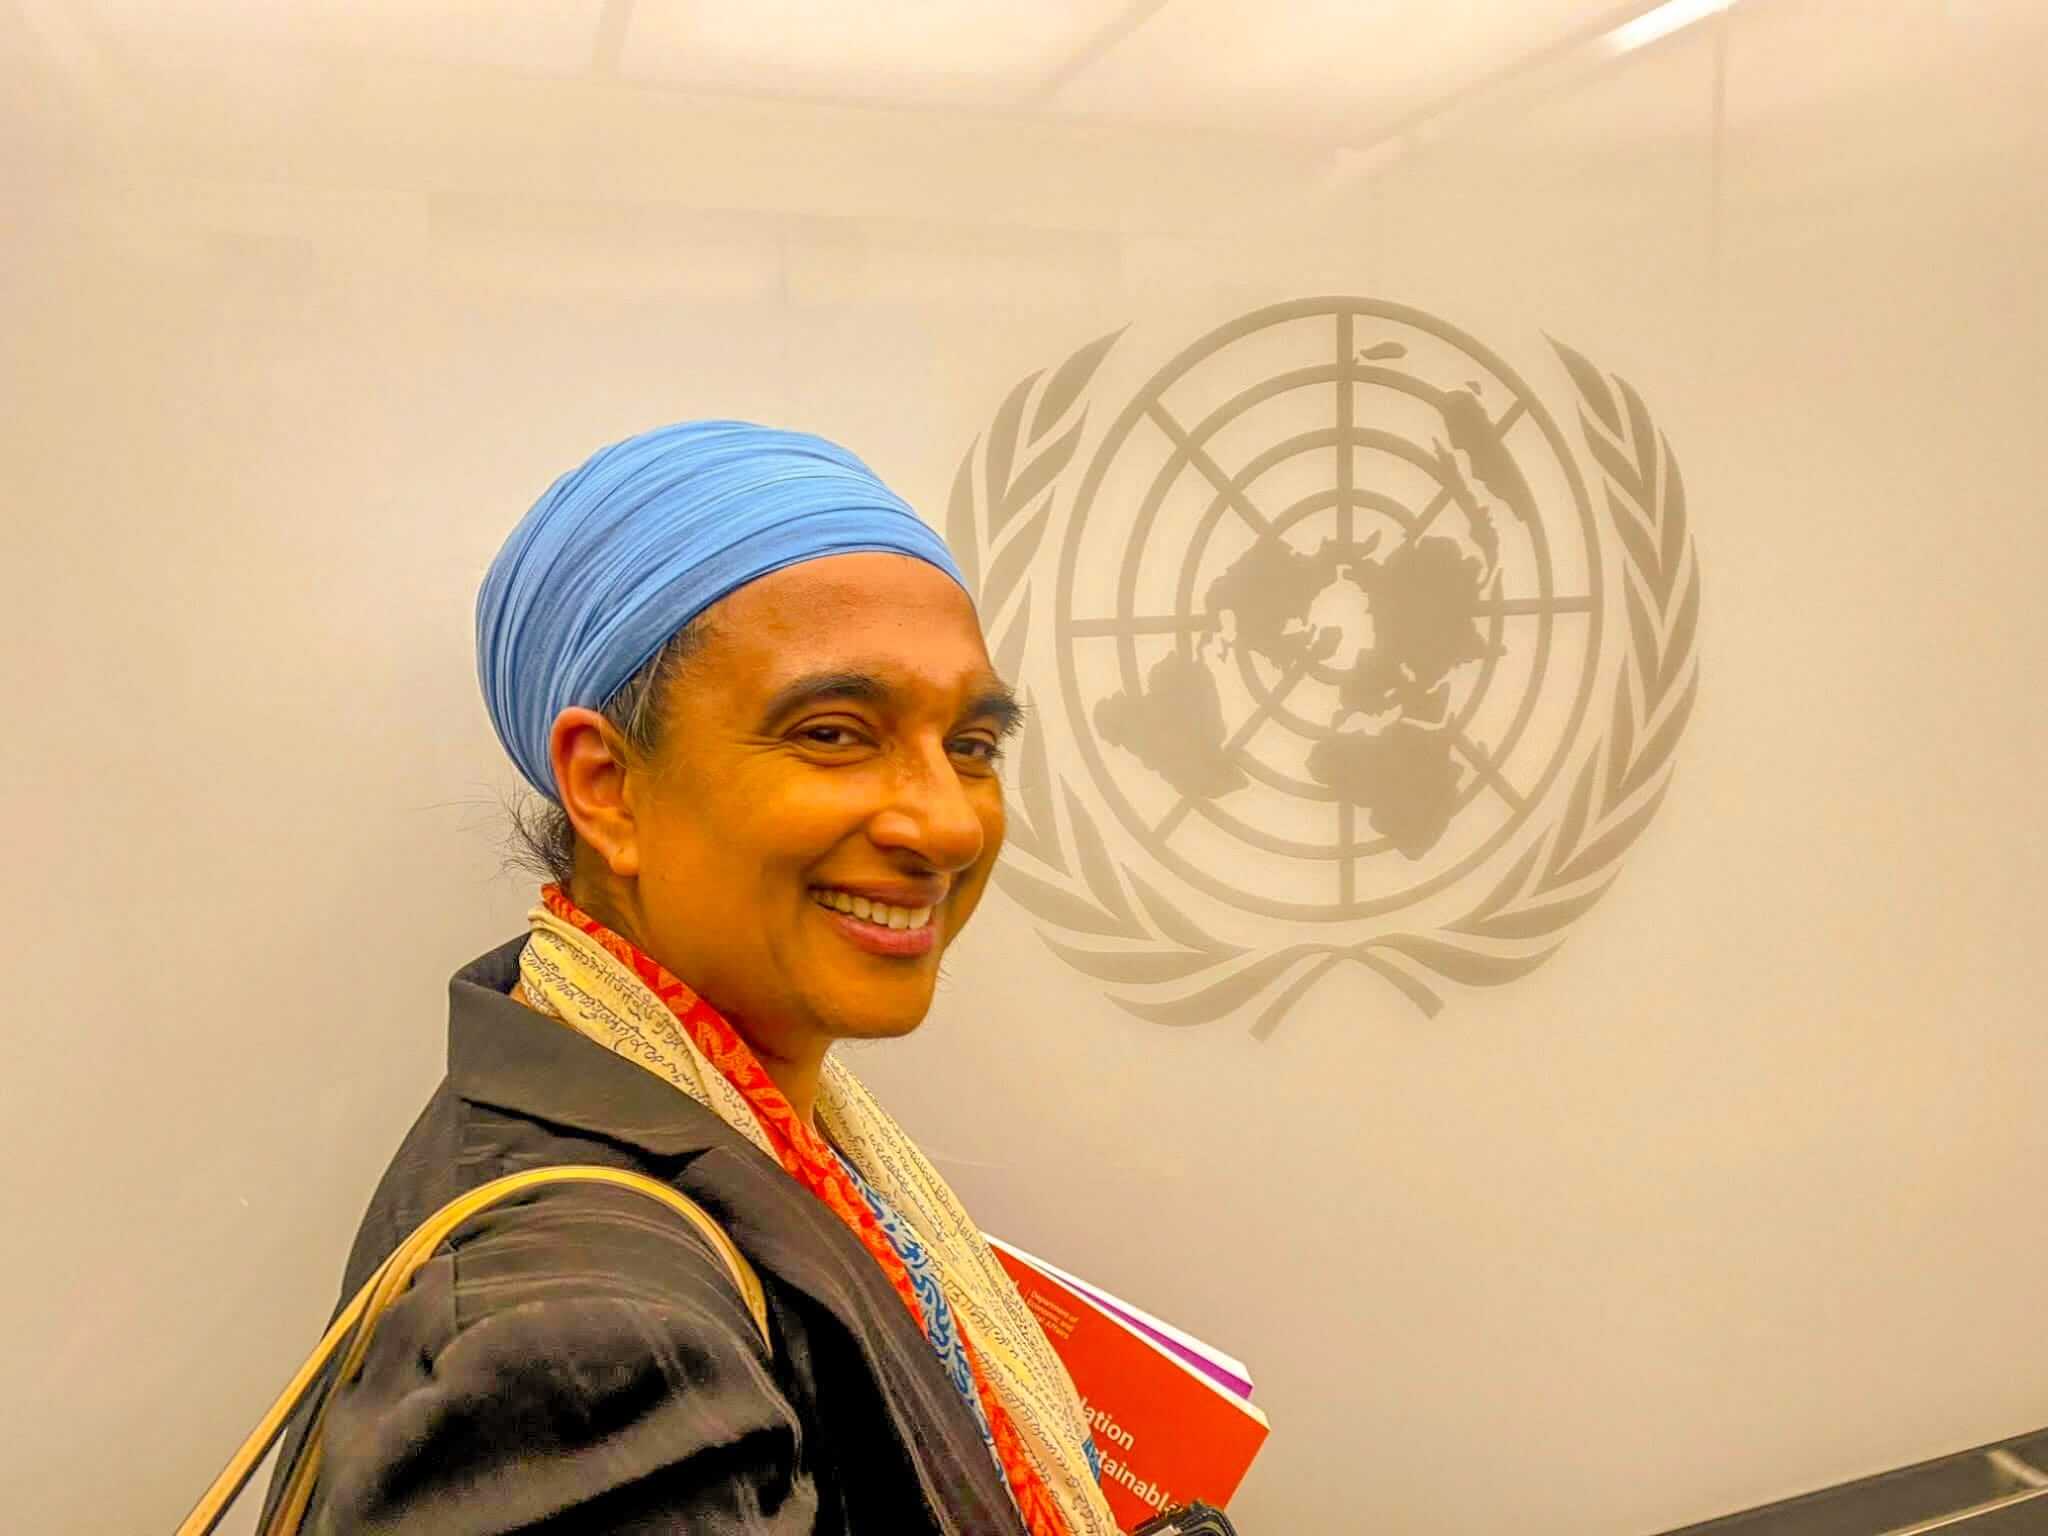 Prof. Rajnarind Kaur presents at the United Nations Commission on Population and Development 56th Session.